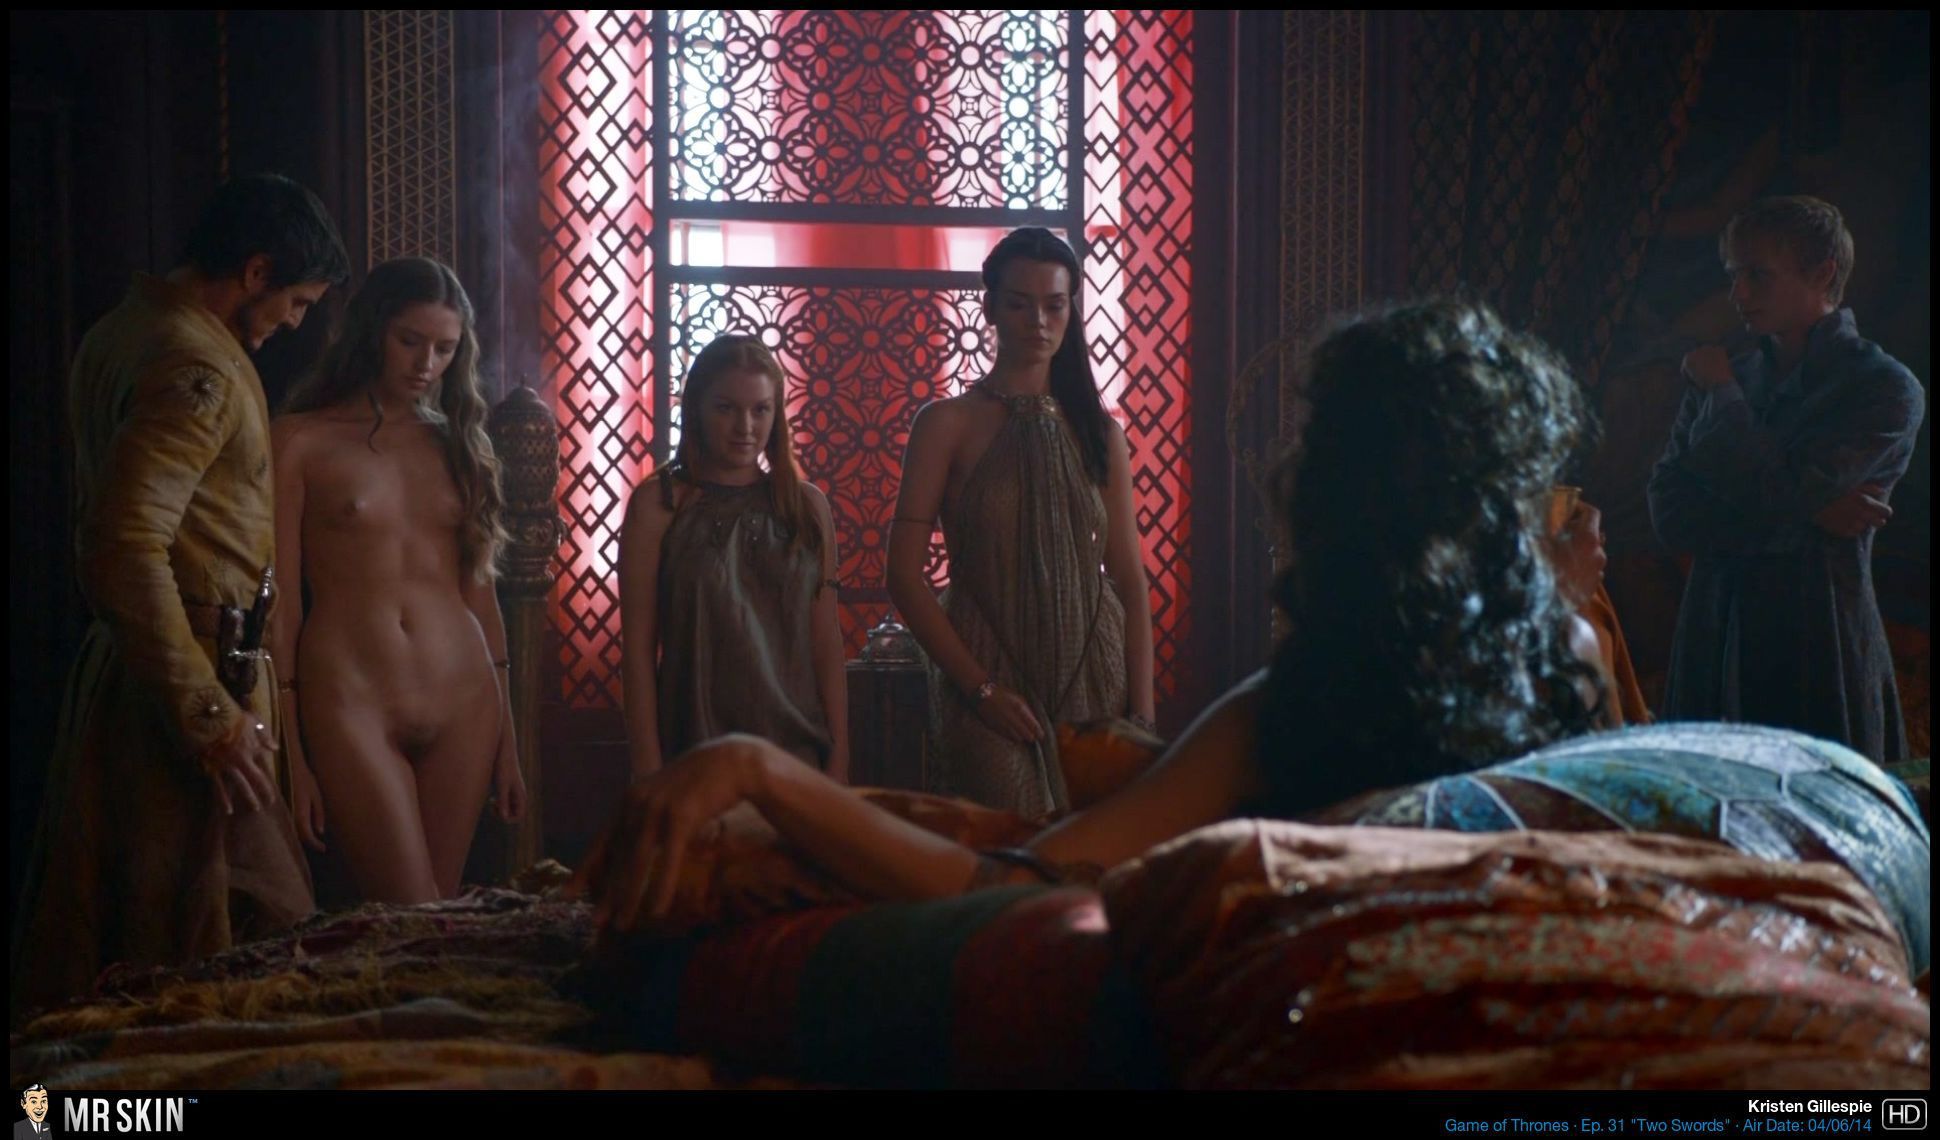 Game Of Thrones Season 4 And More Celebrity Nudity On Dvd